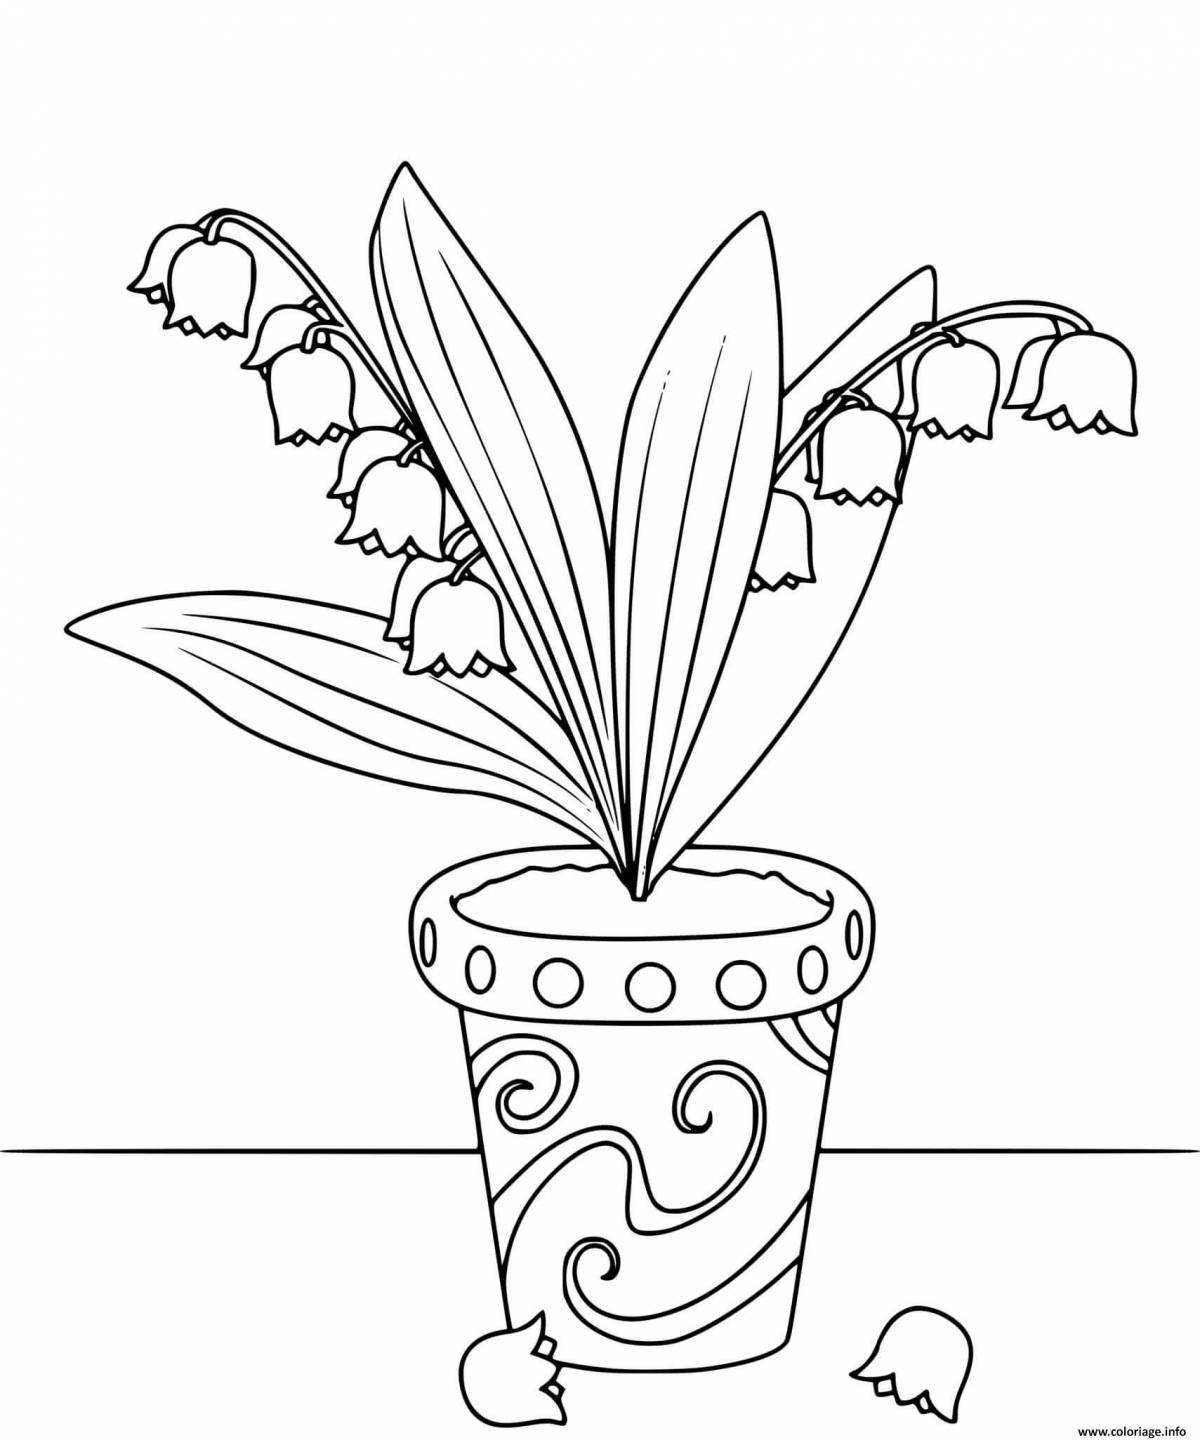 Colorful shiny flower pot coloring book